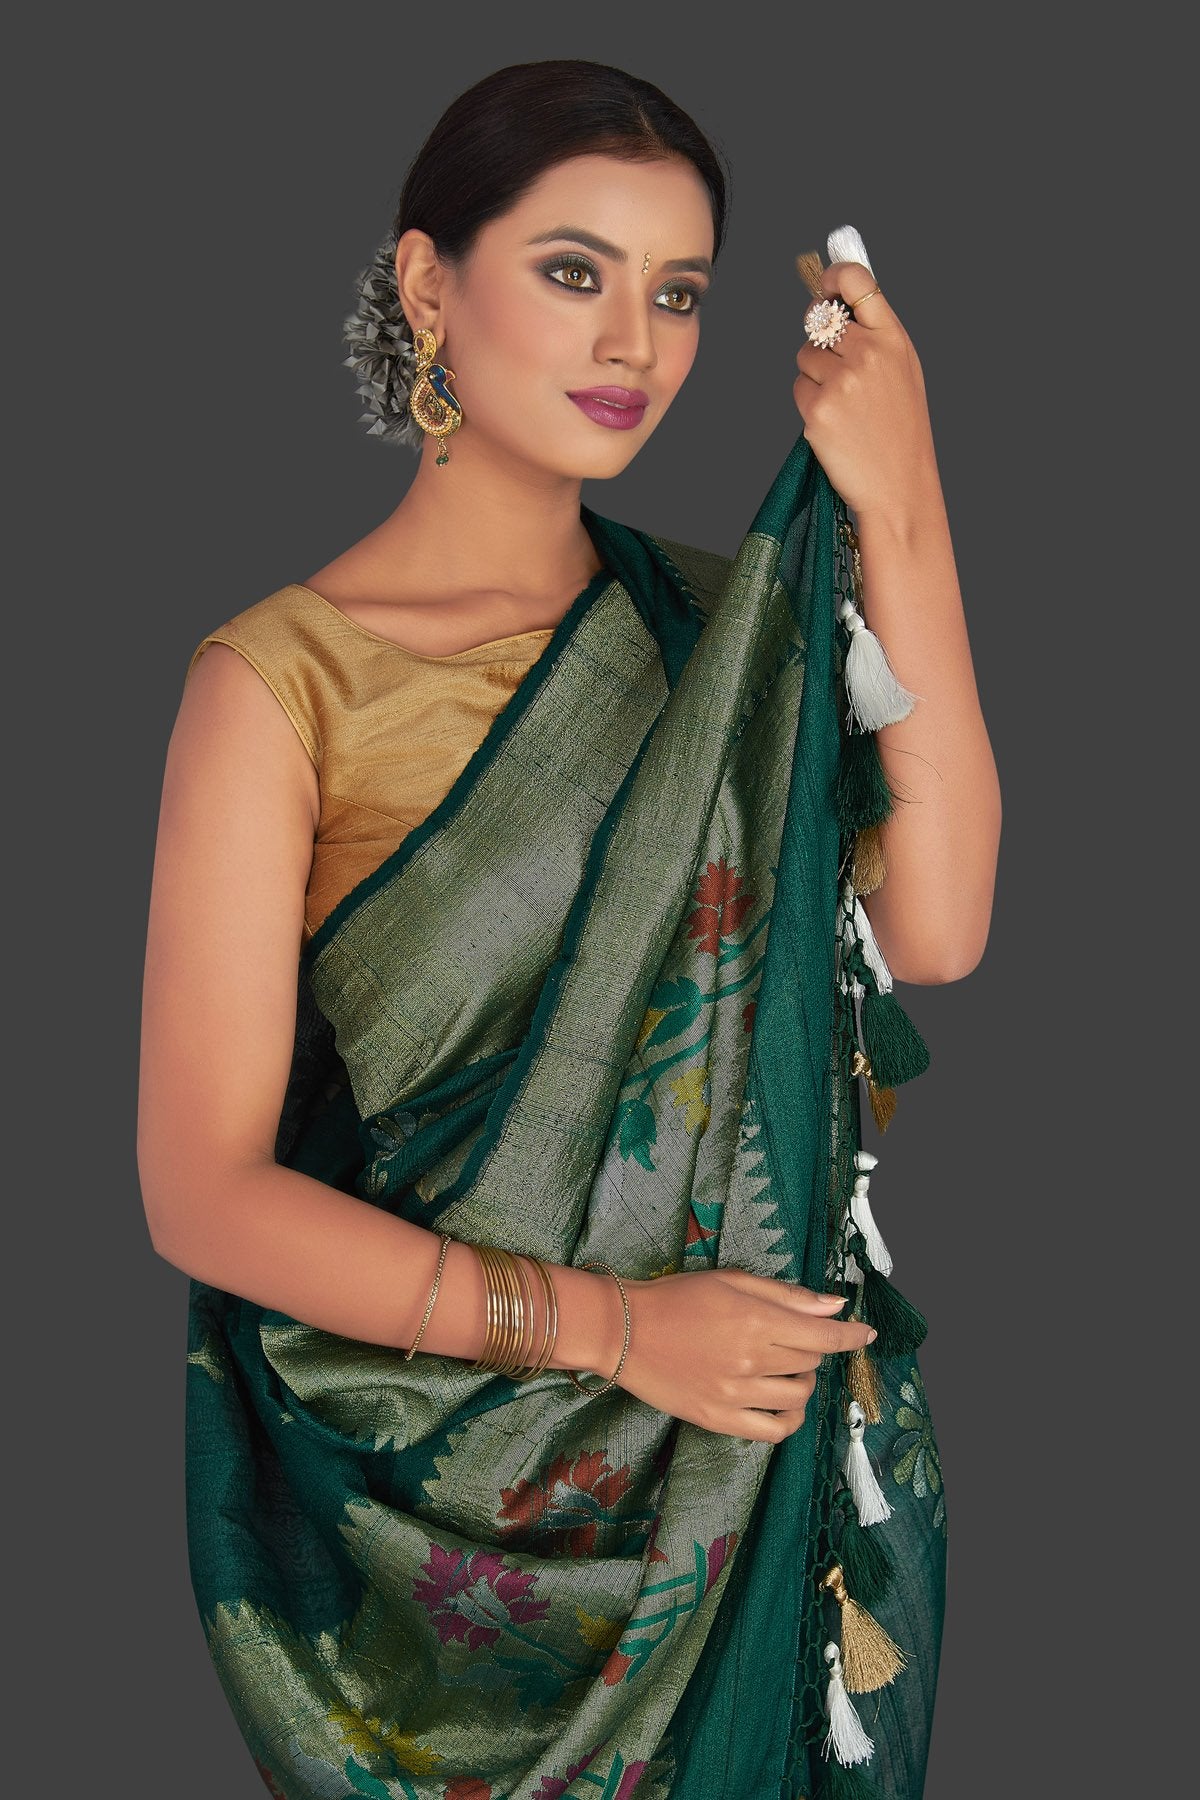 Buy elegant dark green tassar georgette Banarsi saree online in USA with flower buta. Radiate elegance with georgette sarees, Banarasi sarees, handwoven sarees from Pure Elegance Indian fashion boutique in USA. We bring a especially curated collection of ethnic sarees for Indian women in USA under one roof!-closeup